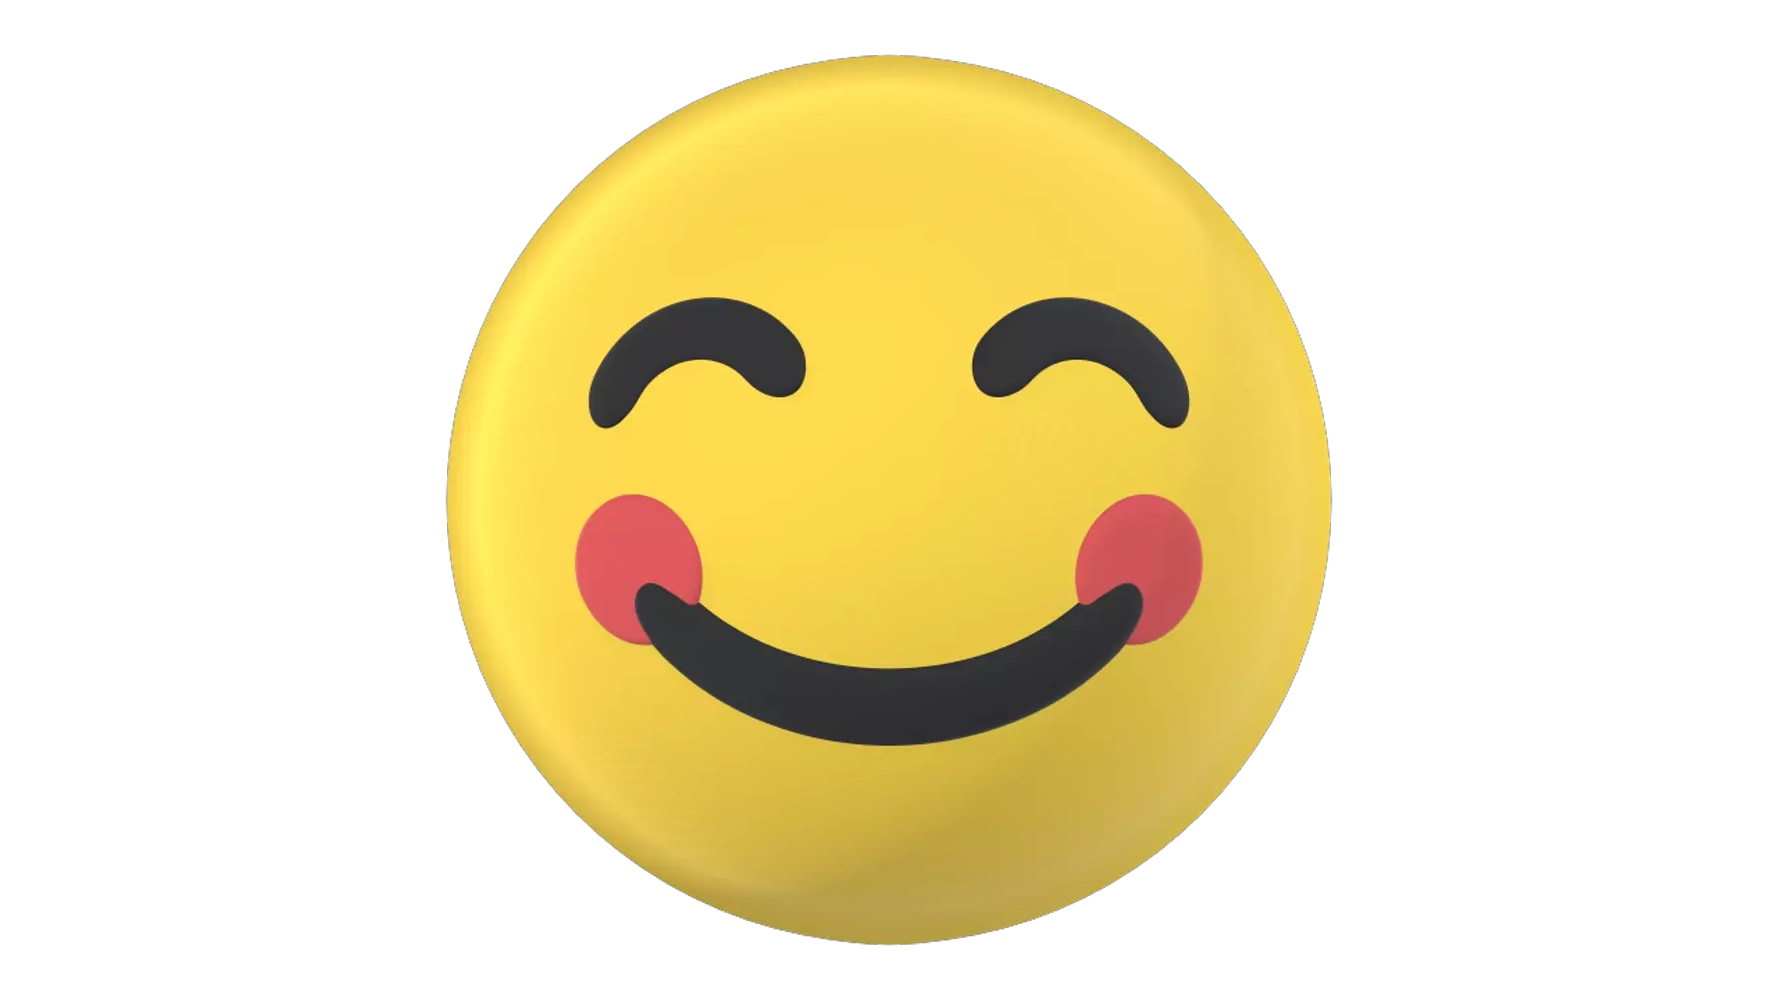 Smiling Face 3D Graphic